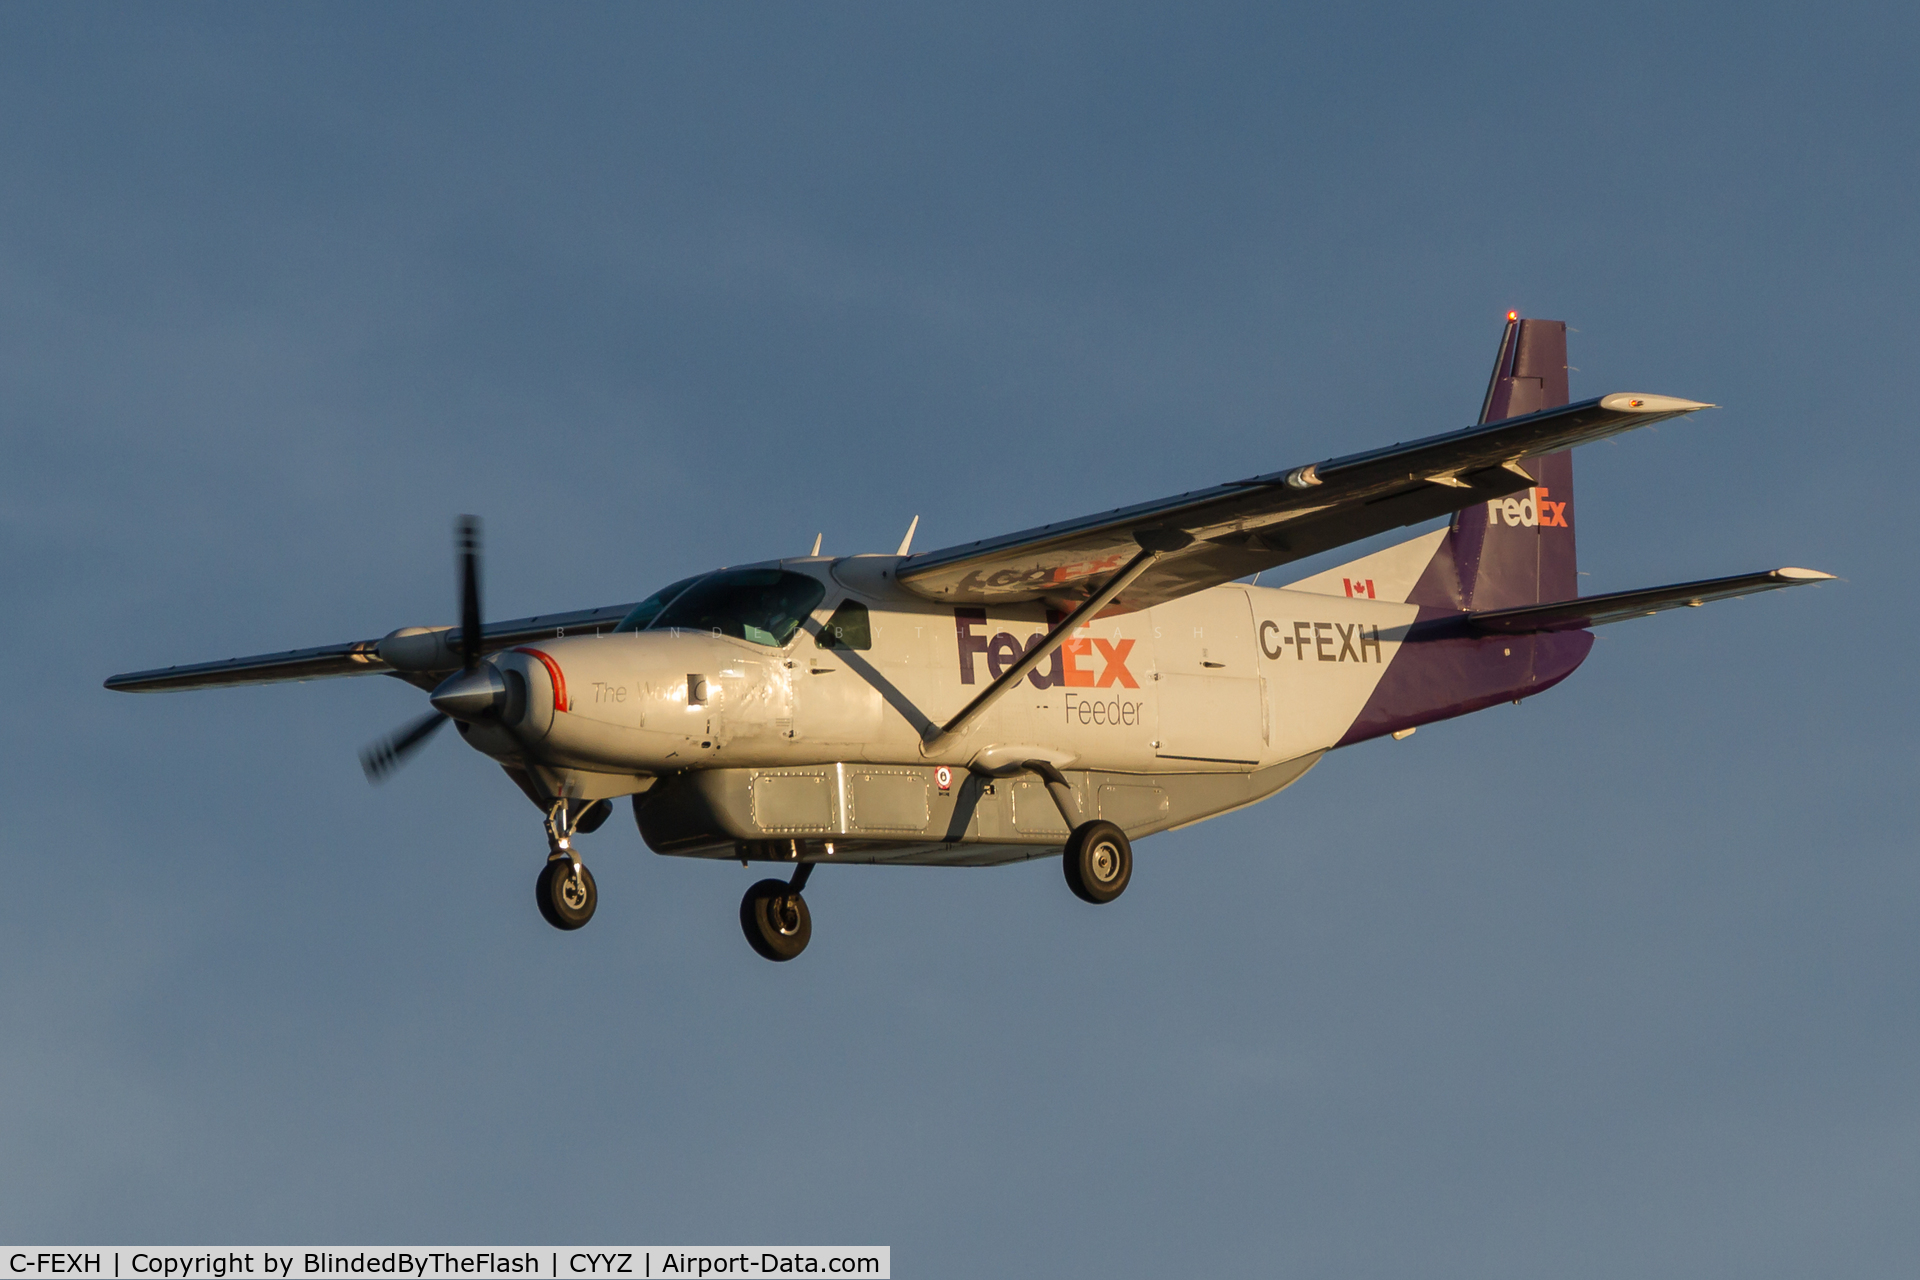 C-FEXH, 1987 Cessna 208B Super Cargomaster C/N 208B-0017, On short final for runway 05 at Toronto Pearson